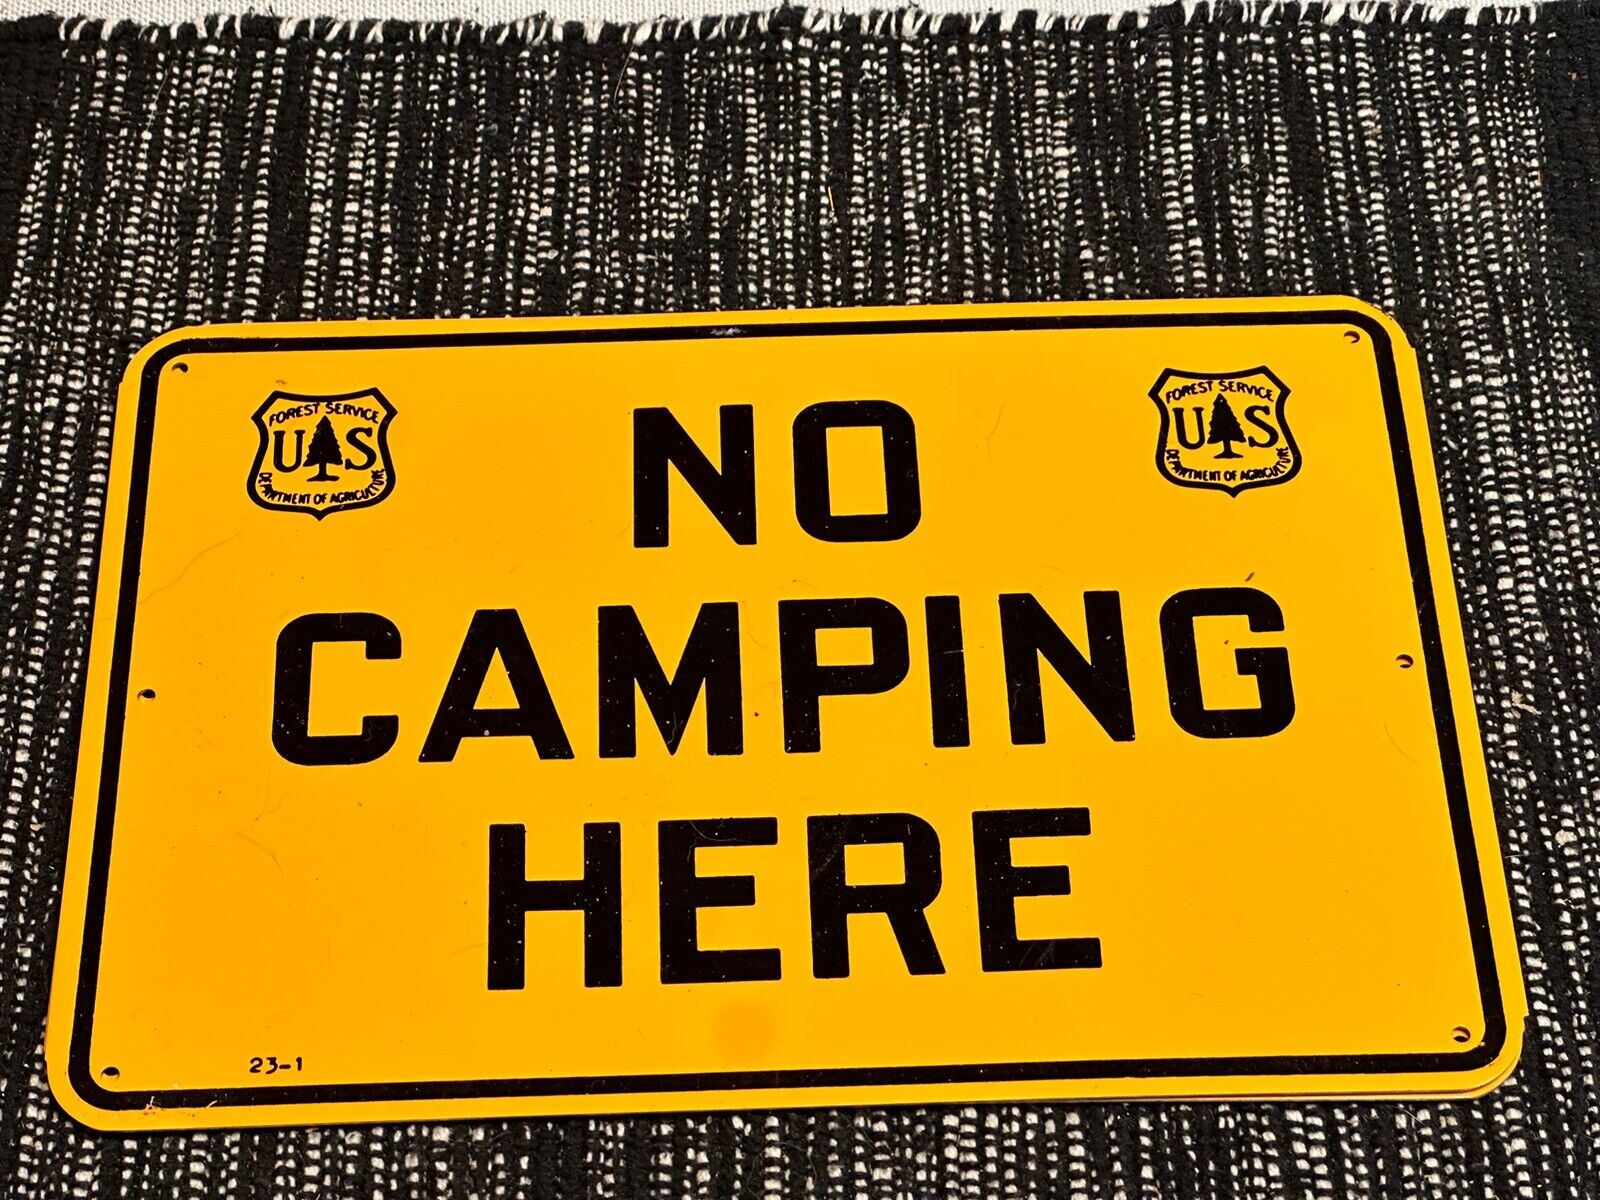 Vintage USFS US Forest Forestry Service ”NO CAMPING HERE” Metal Sign